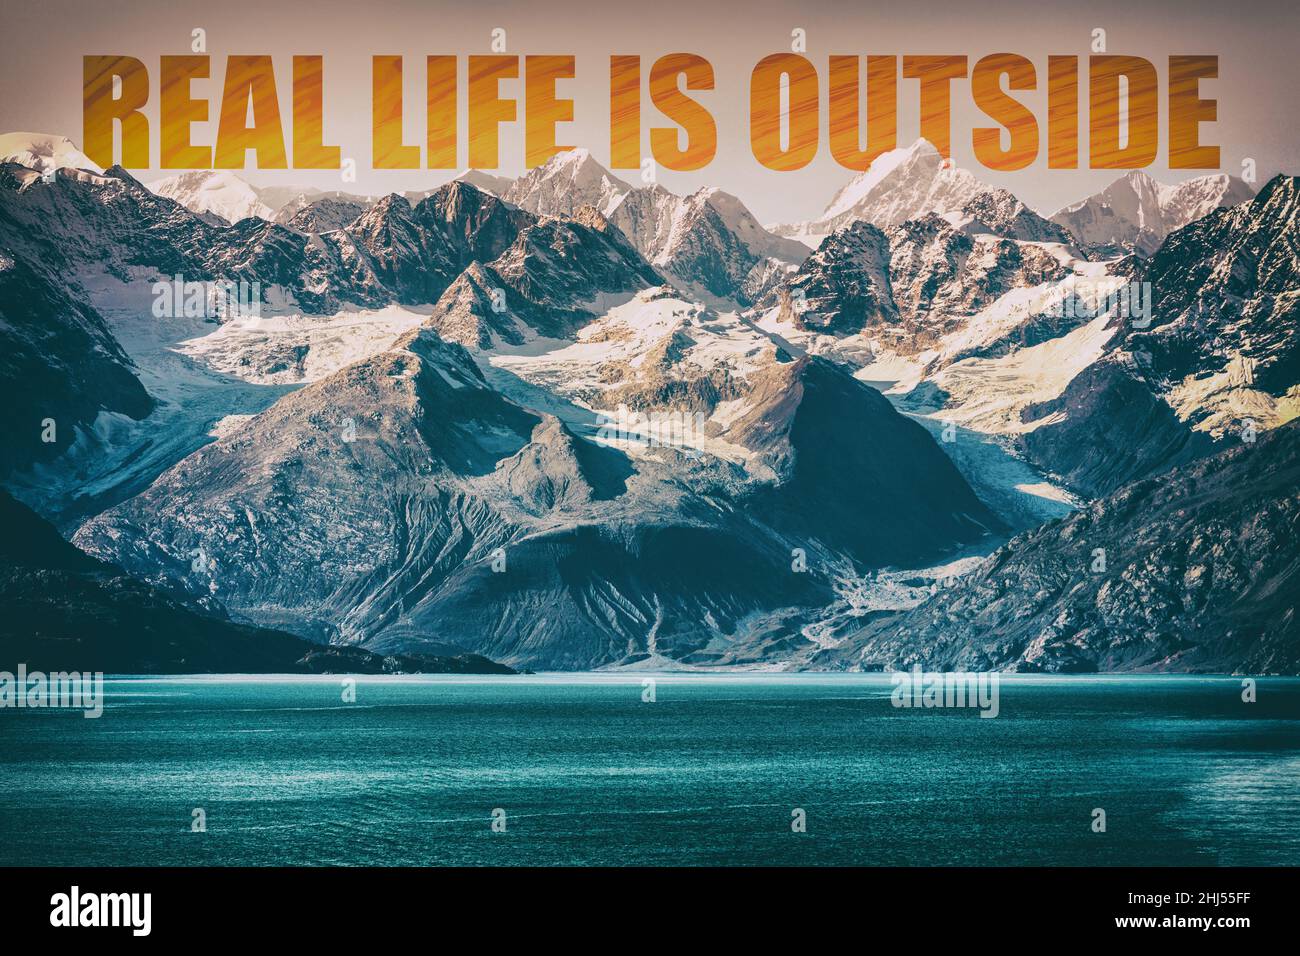 REAL LIFE IS OUTSIDE motivational quote on mountain range landscape background. Adventure message to inspire people to travel in nature. Snow capped Stock Photo